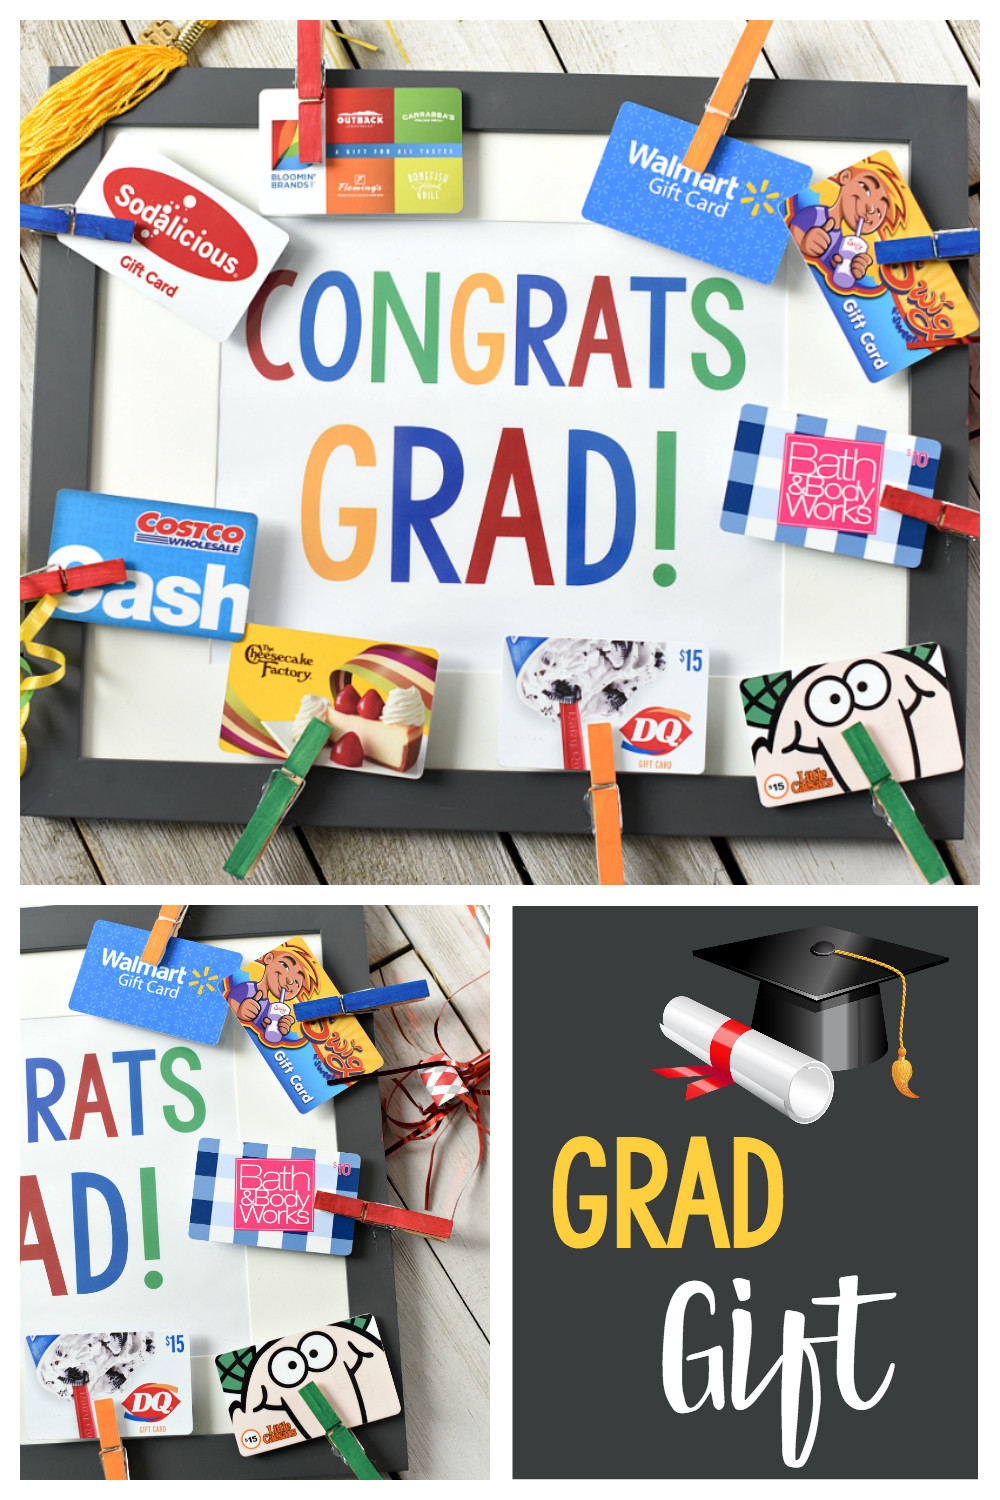 Masters Graduation Gift Ideas For Her
 Cute Graduation Gifts Congrats Grad Gift Card Frame – Fun